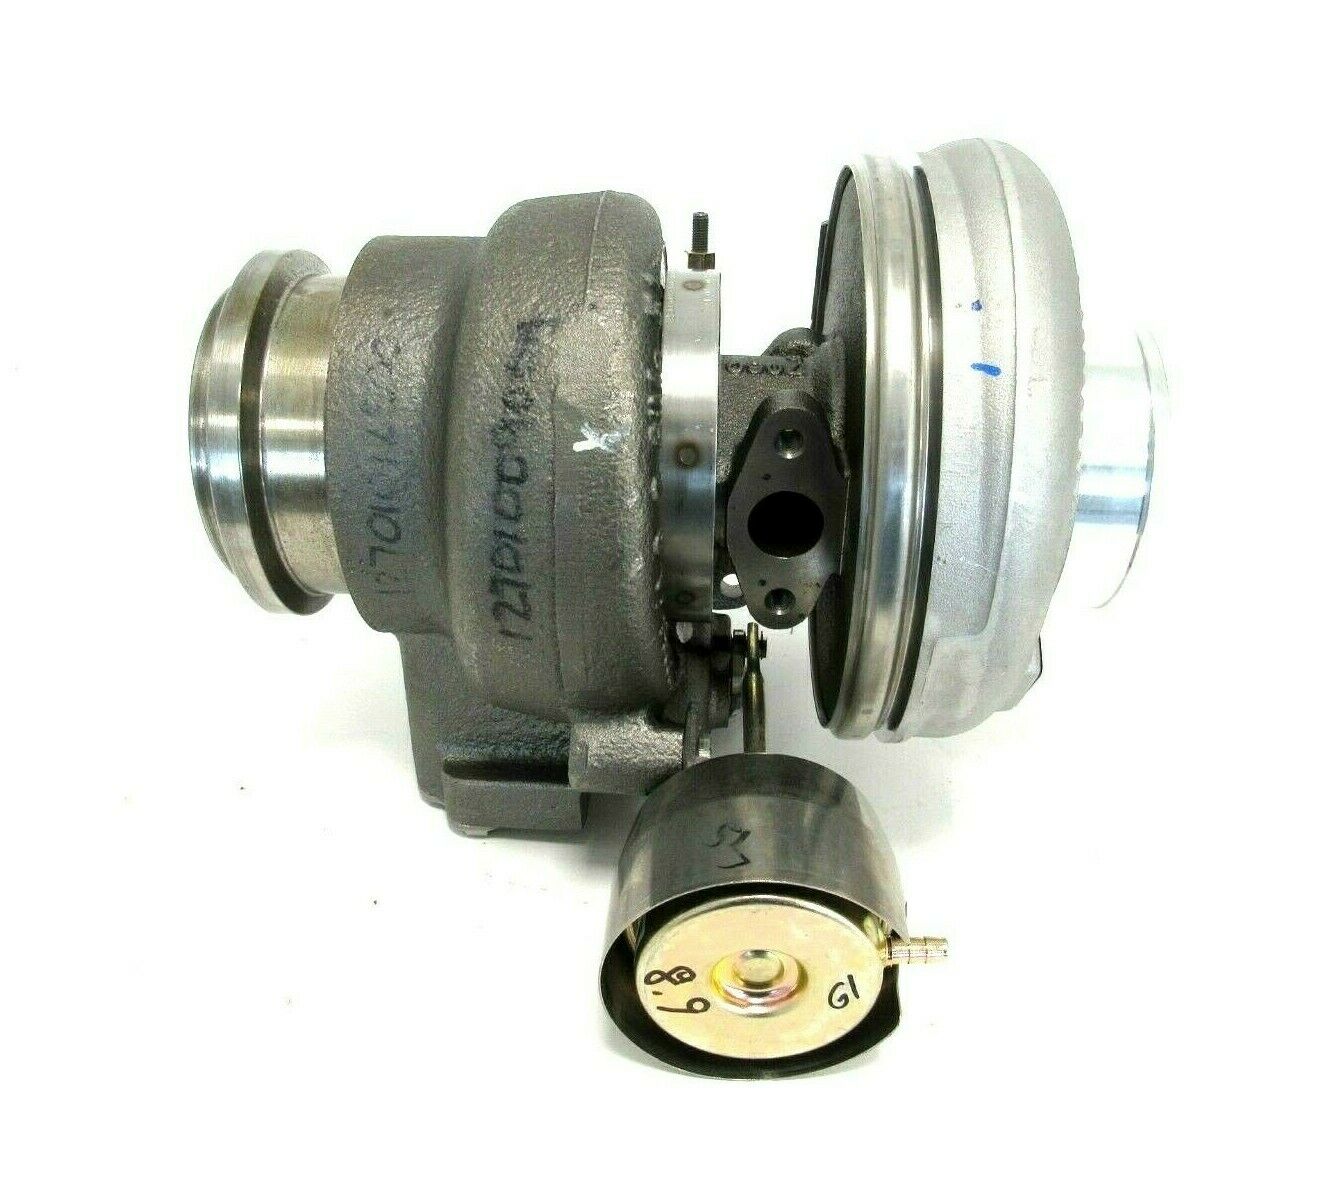 NEW BORG WARNER 10709880002 TURBO CHARGER LM25TF 53271013081A – SB 